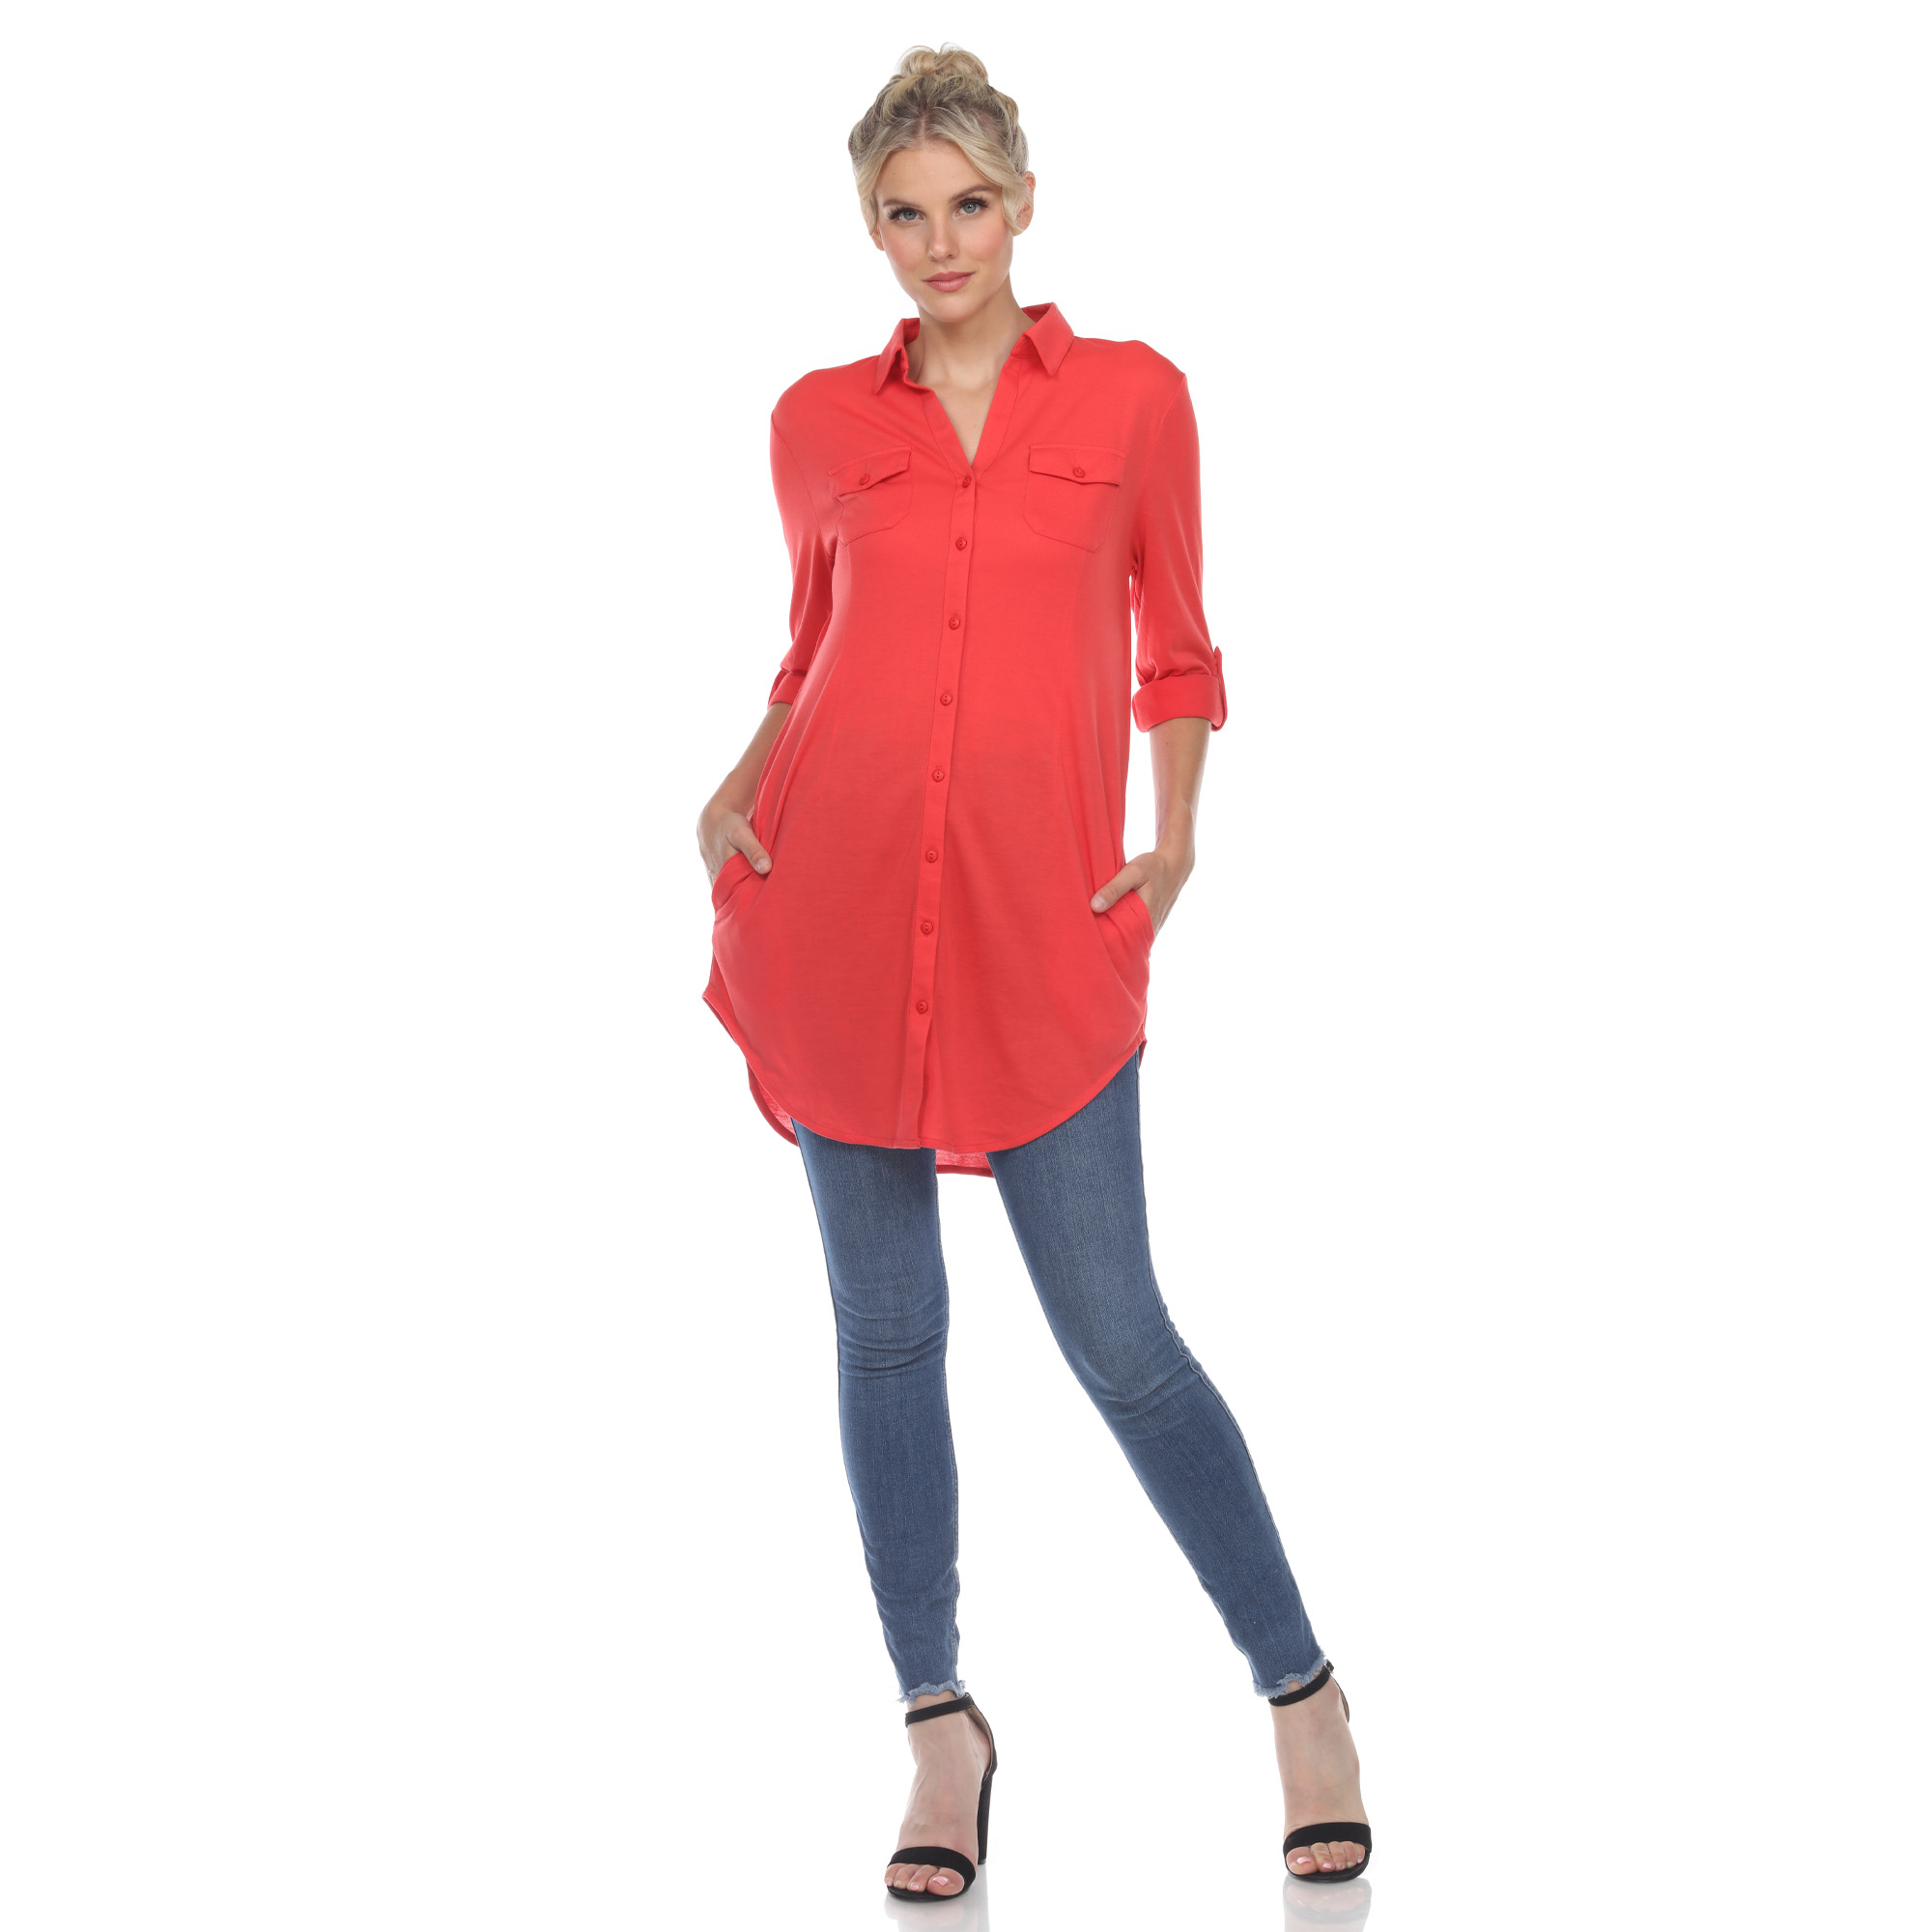 White Mark Women's Stretchy Quarter Sleeve Button Down Tunic Top With Pockets - Red, 3X